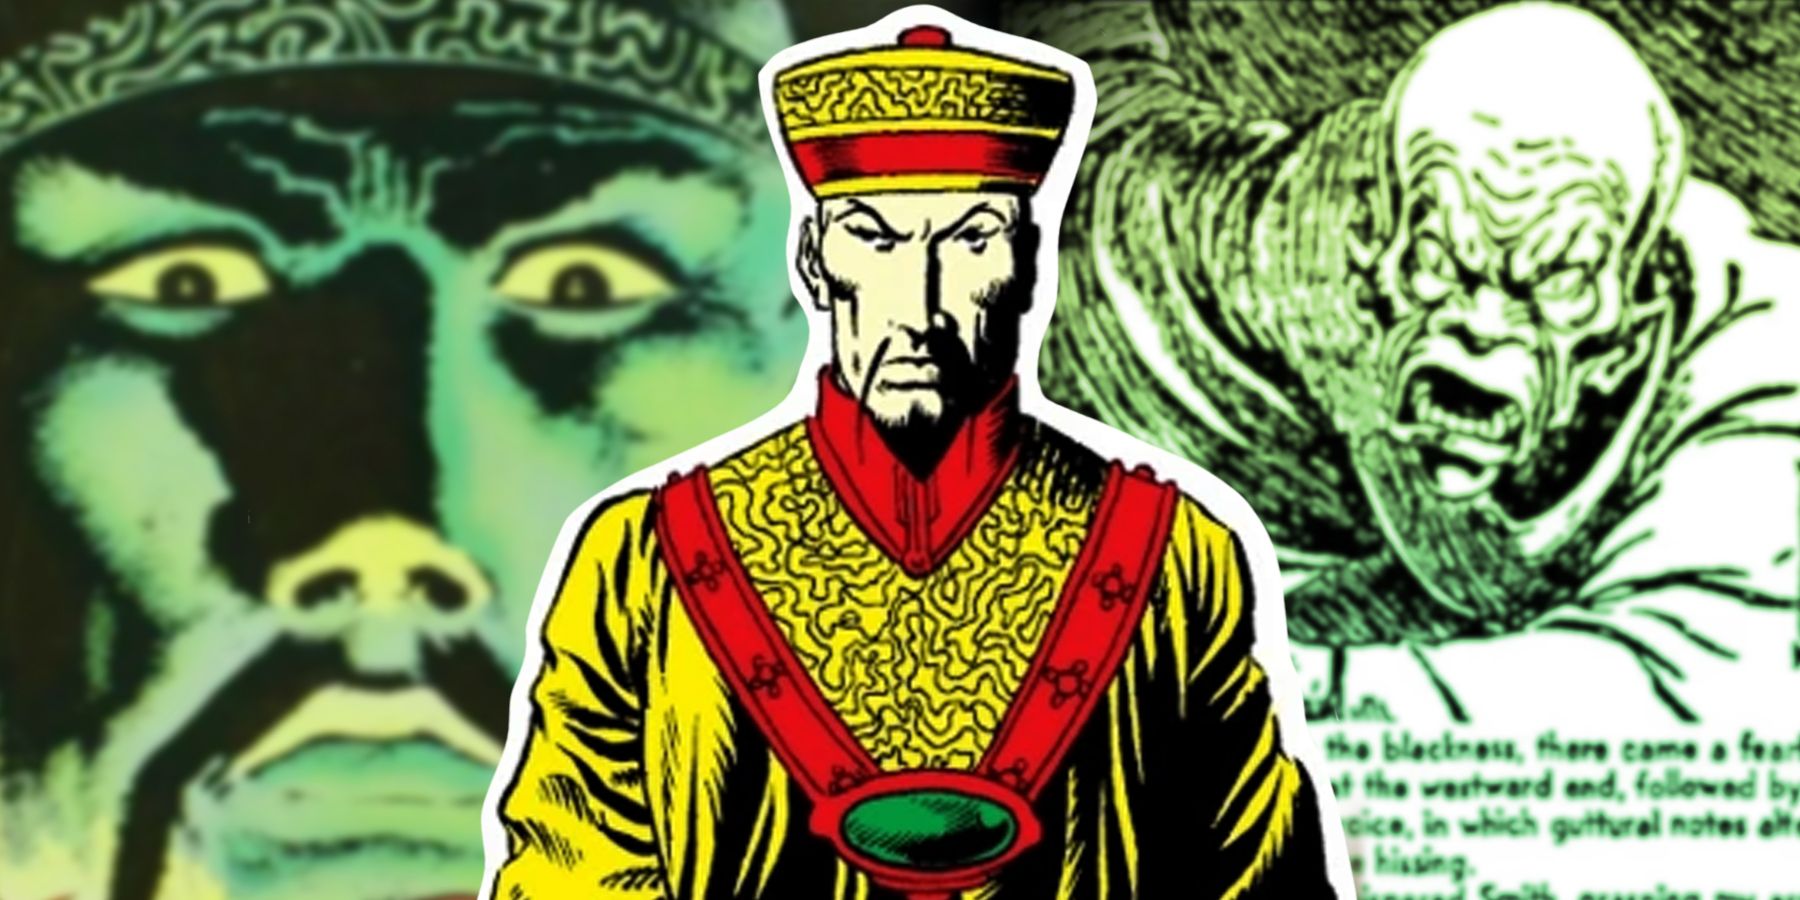 Fu Manchu as depicted in comic illustrations throughout the 20th century.